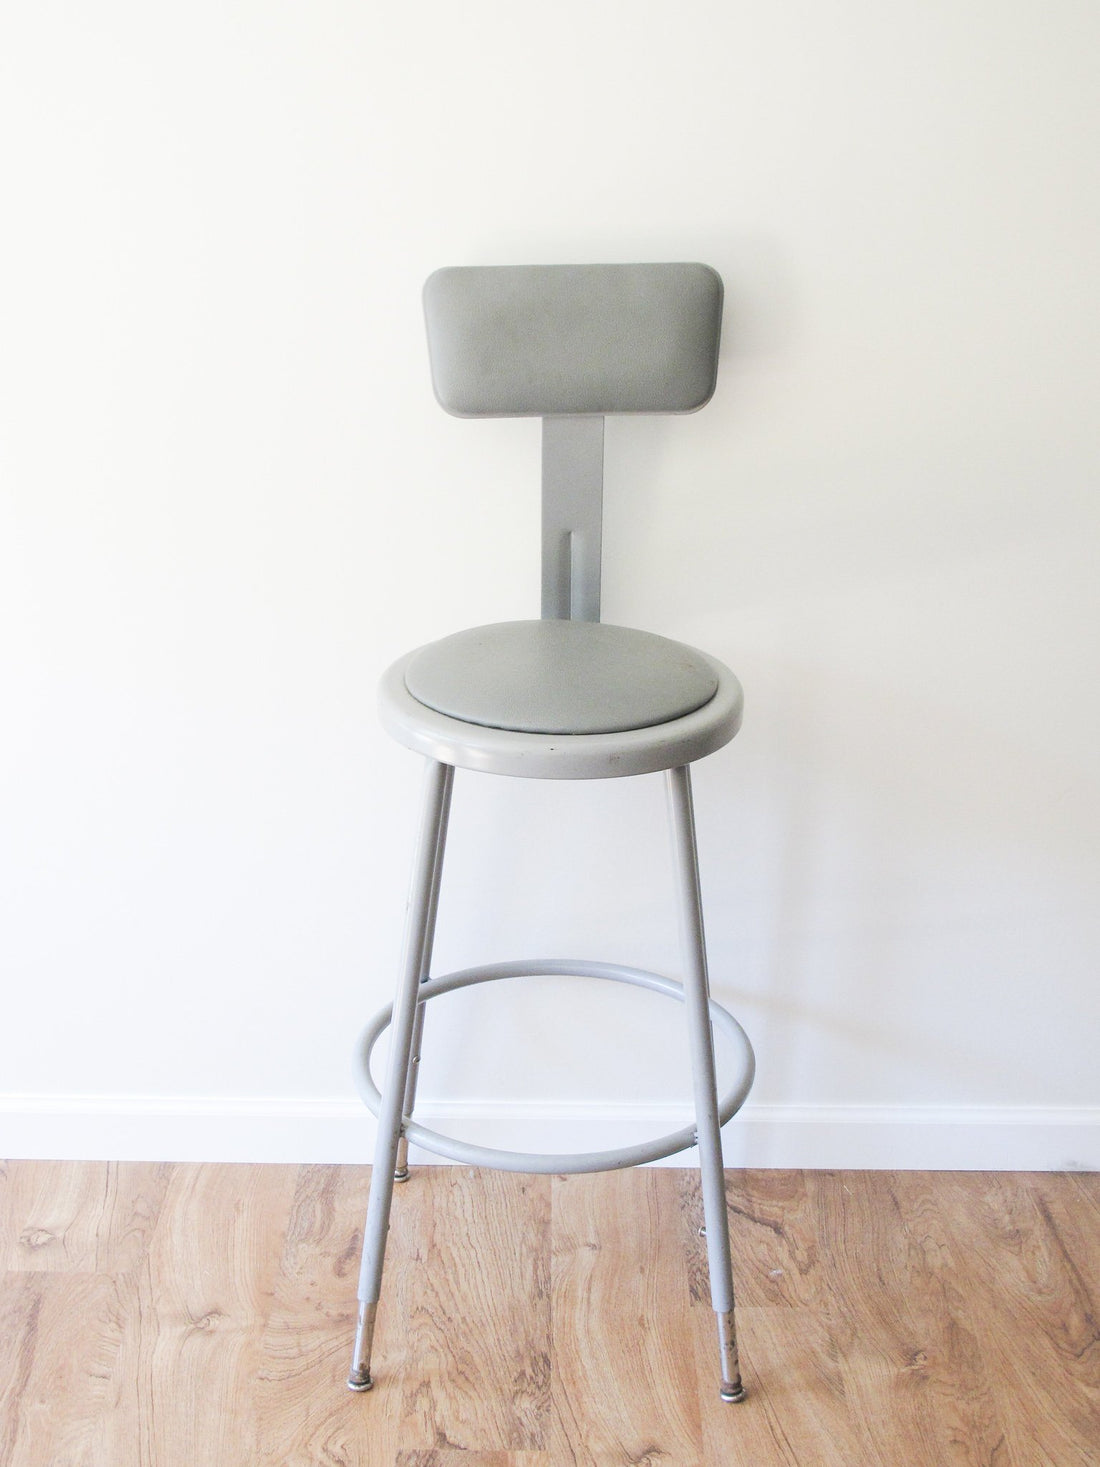 Vintage National Public Seating Industrial Science Lab Chair / Bar Stool